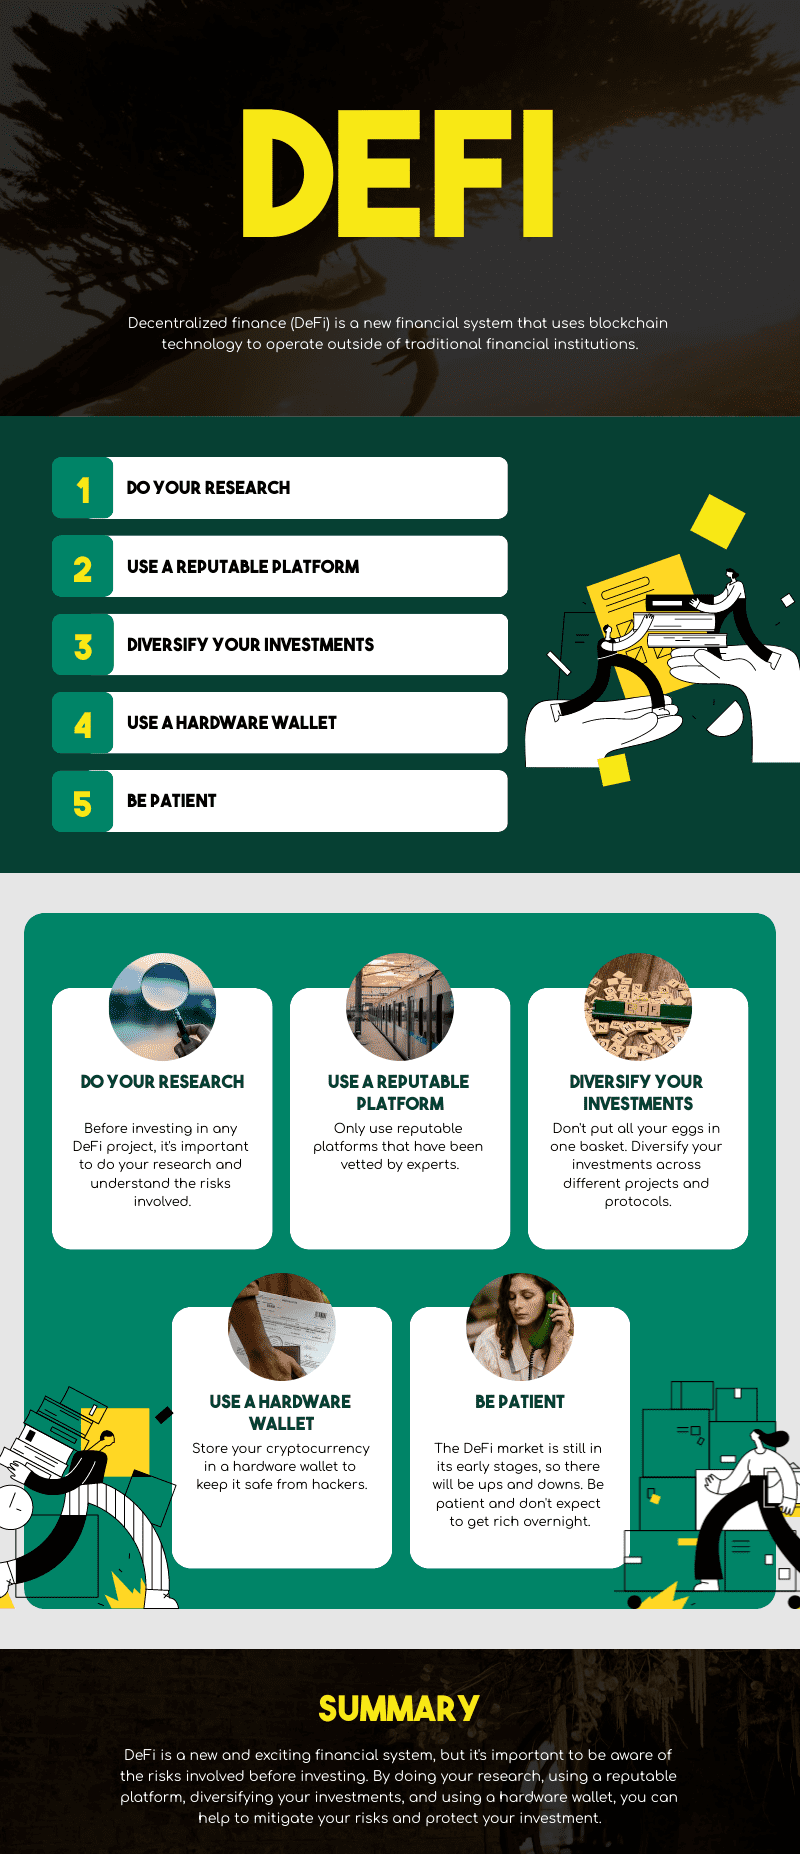 An infographic titled 'How to Invest in DeFi Projects Safely.' The infographic provides a visual guide on safely investing in DeFi (Decentralized Finance) projects. It includes sections on research, risk assessment, and security measures. Key elements include charts, icons, and text highlighting important steps for secure DeFi investments.